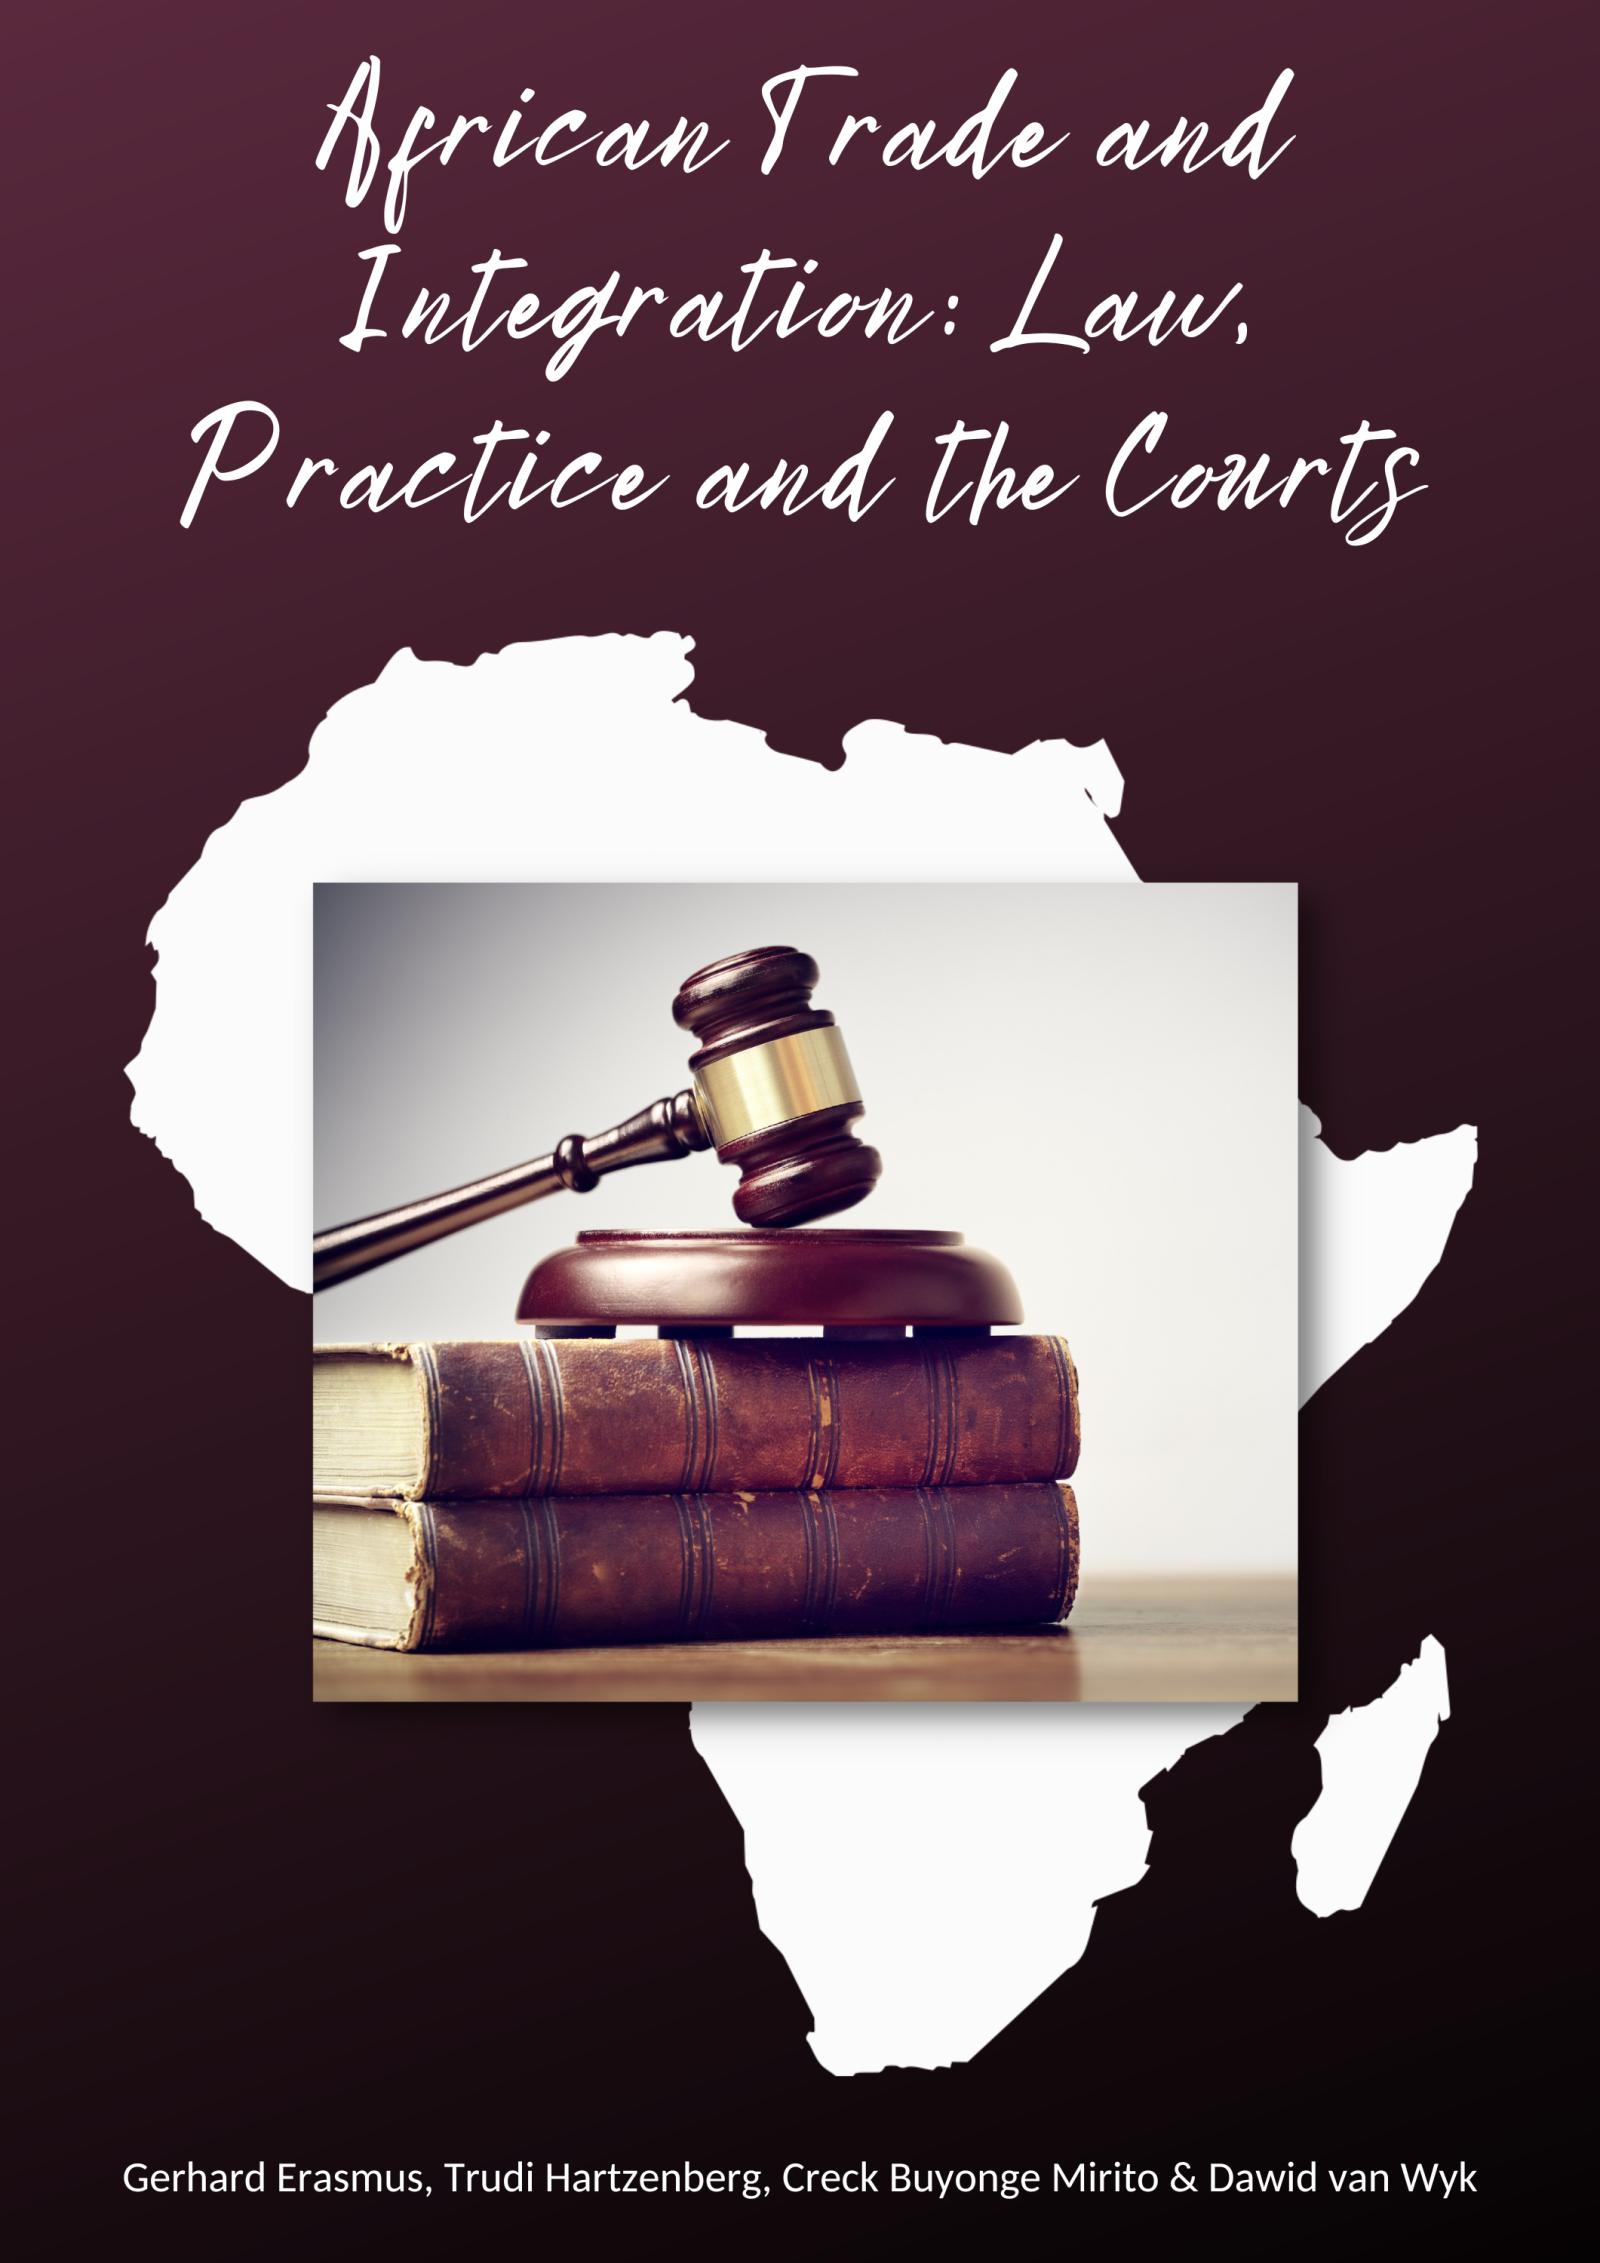 African Trade and Integration: Law, Practice and the Courts